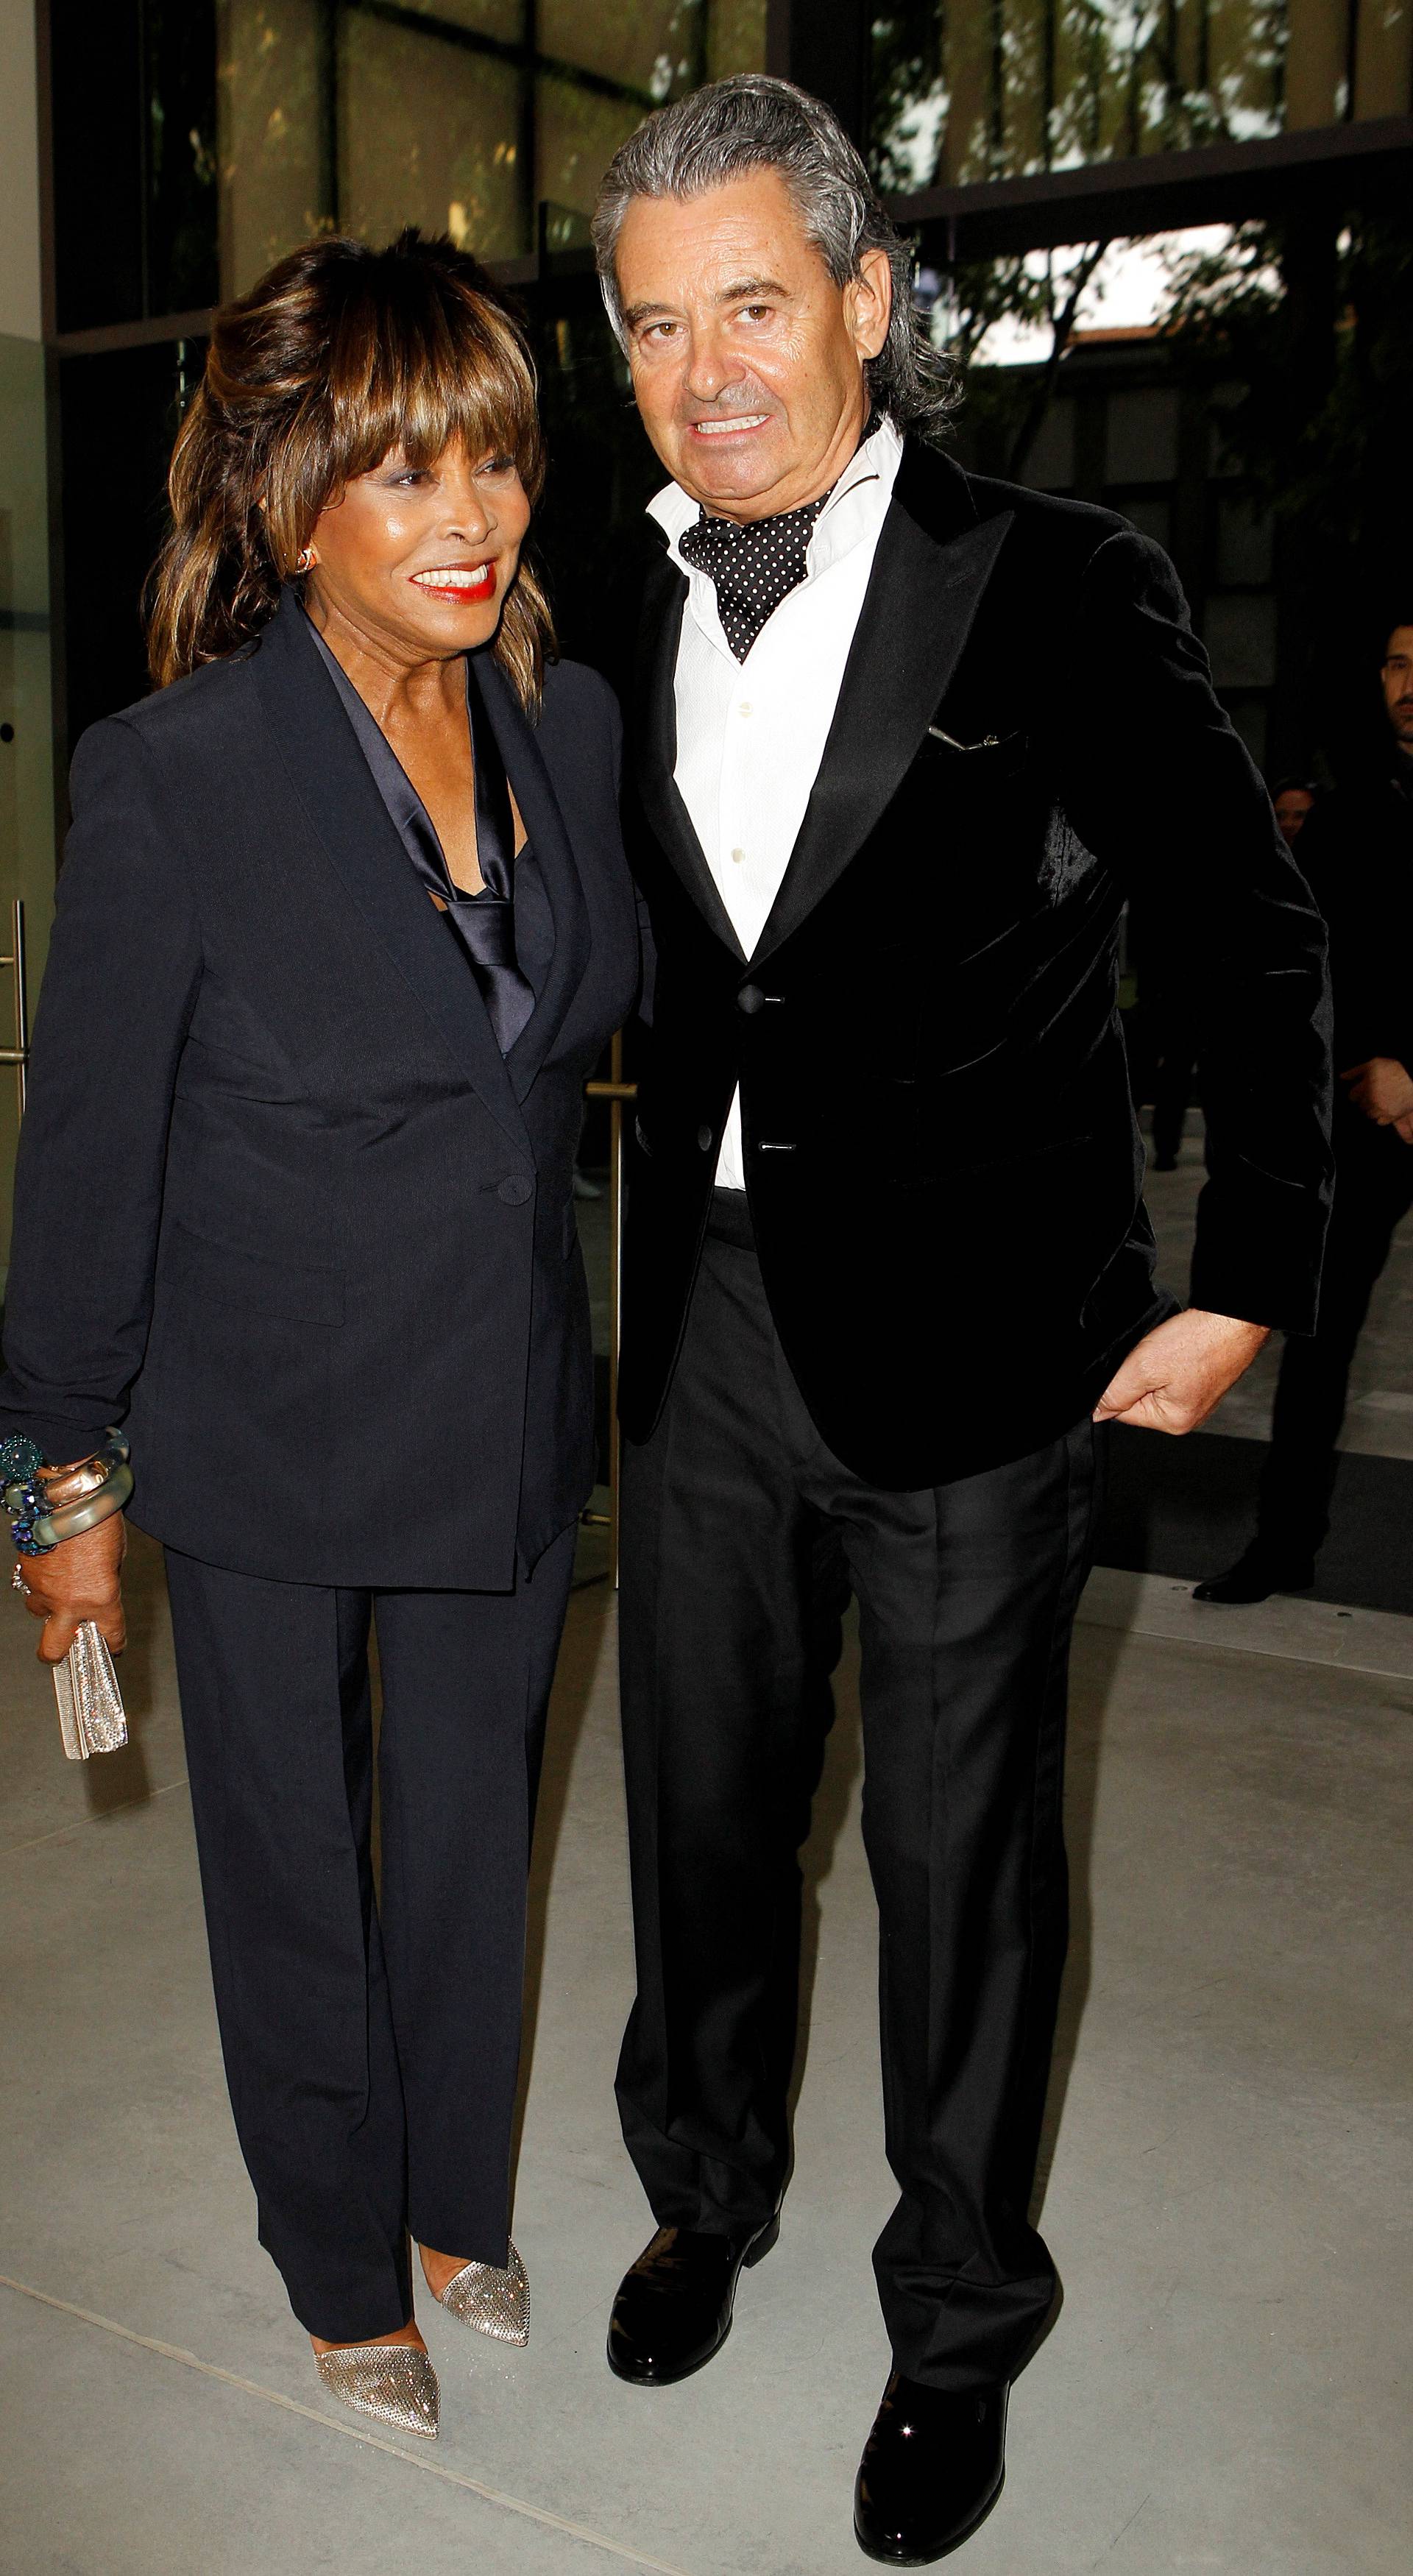 FILE PHOTO: Tina Turner pose with husband Erwin Bach before Giorgio Armani's fashion show to celebrate 40th anniversary of career and to mark opening of the Expo 2015 in Milan